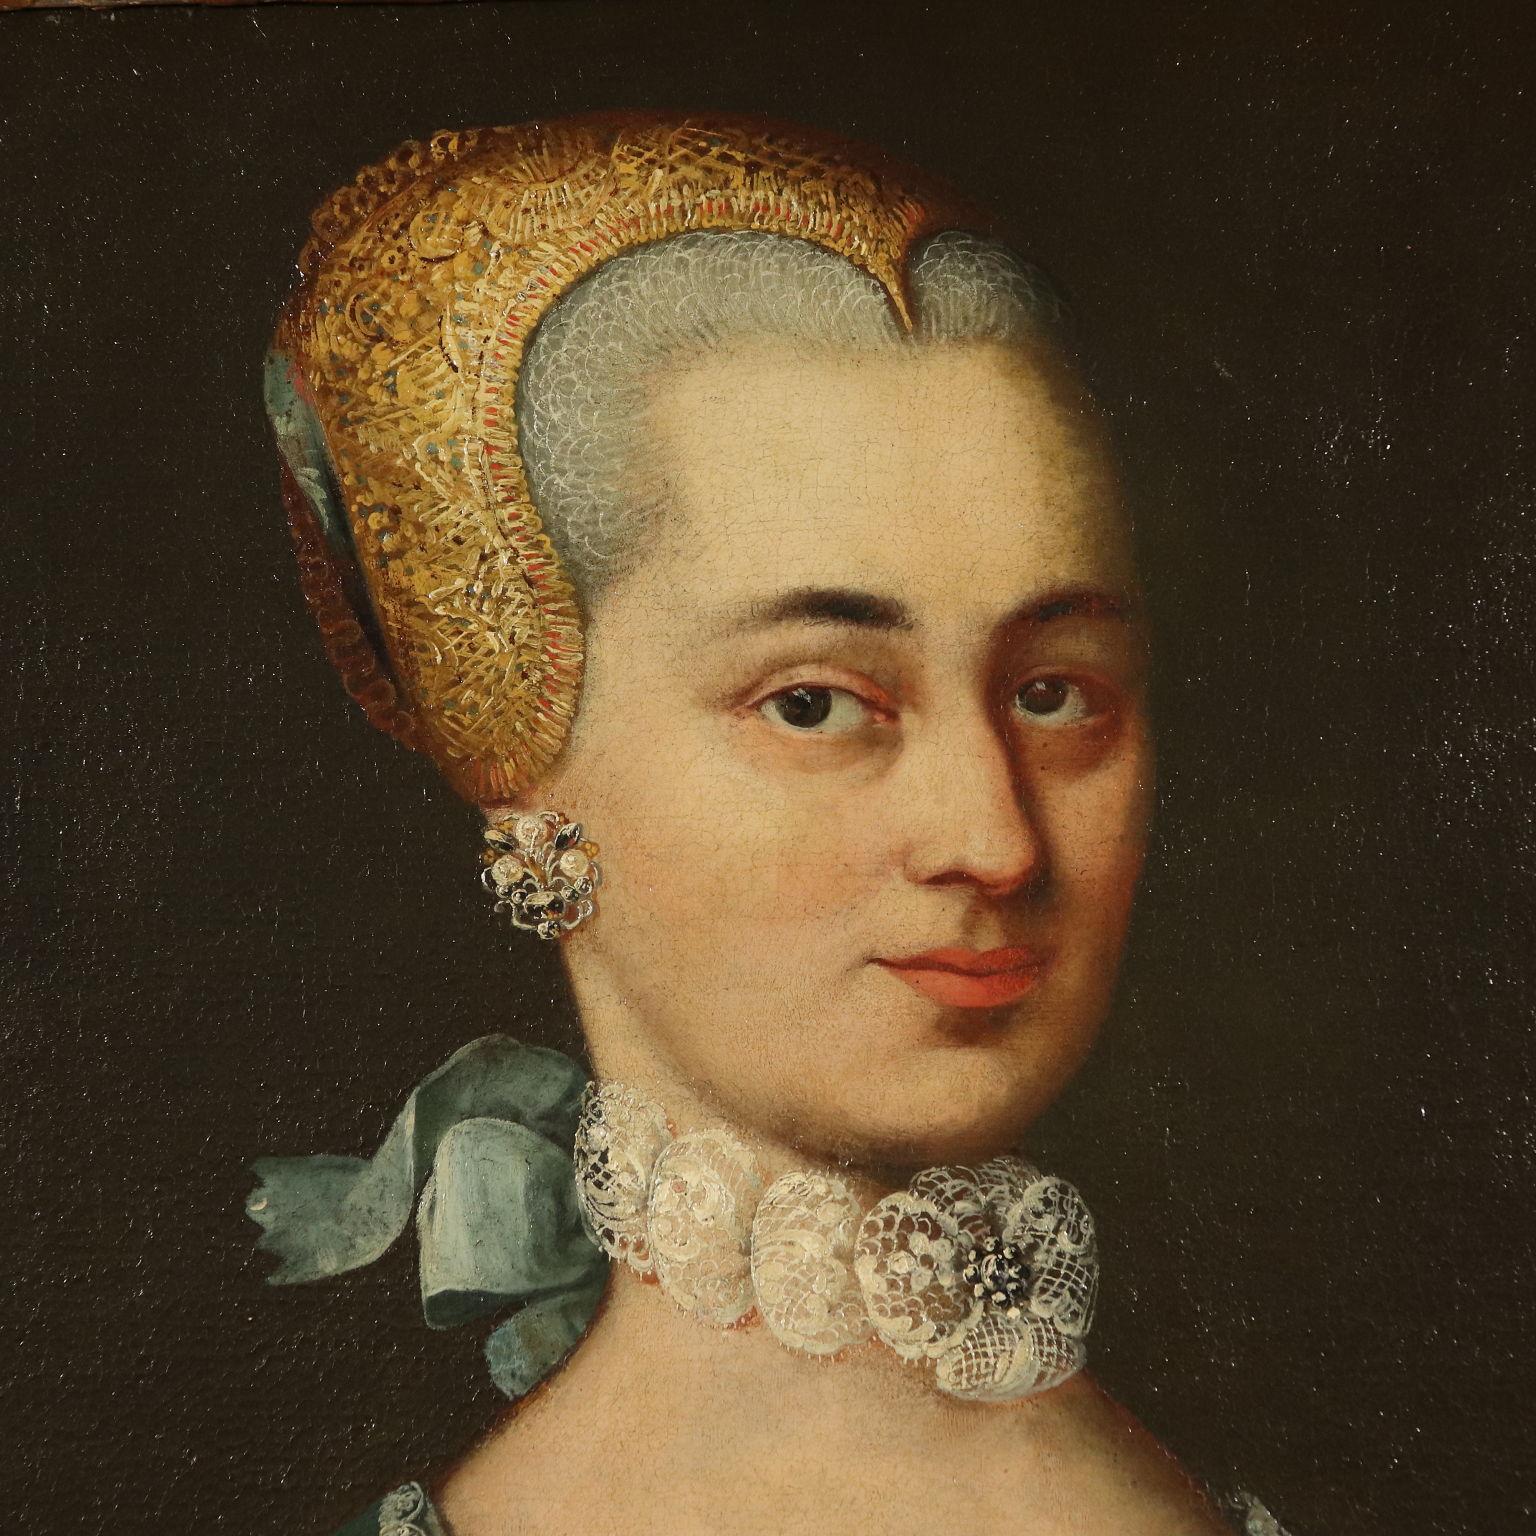 Portrait of Noblewoman Oil Painting 18th Century - Brown Portrait Painting by Unknown